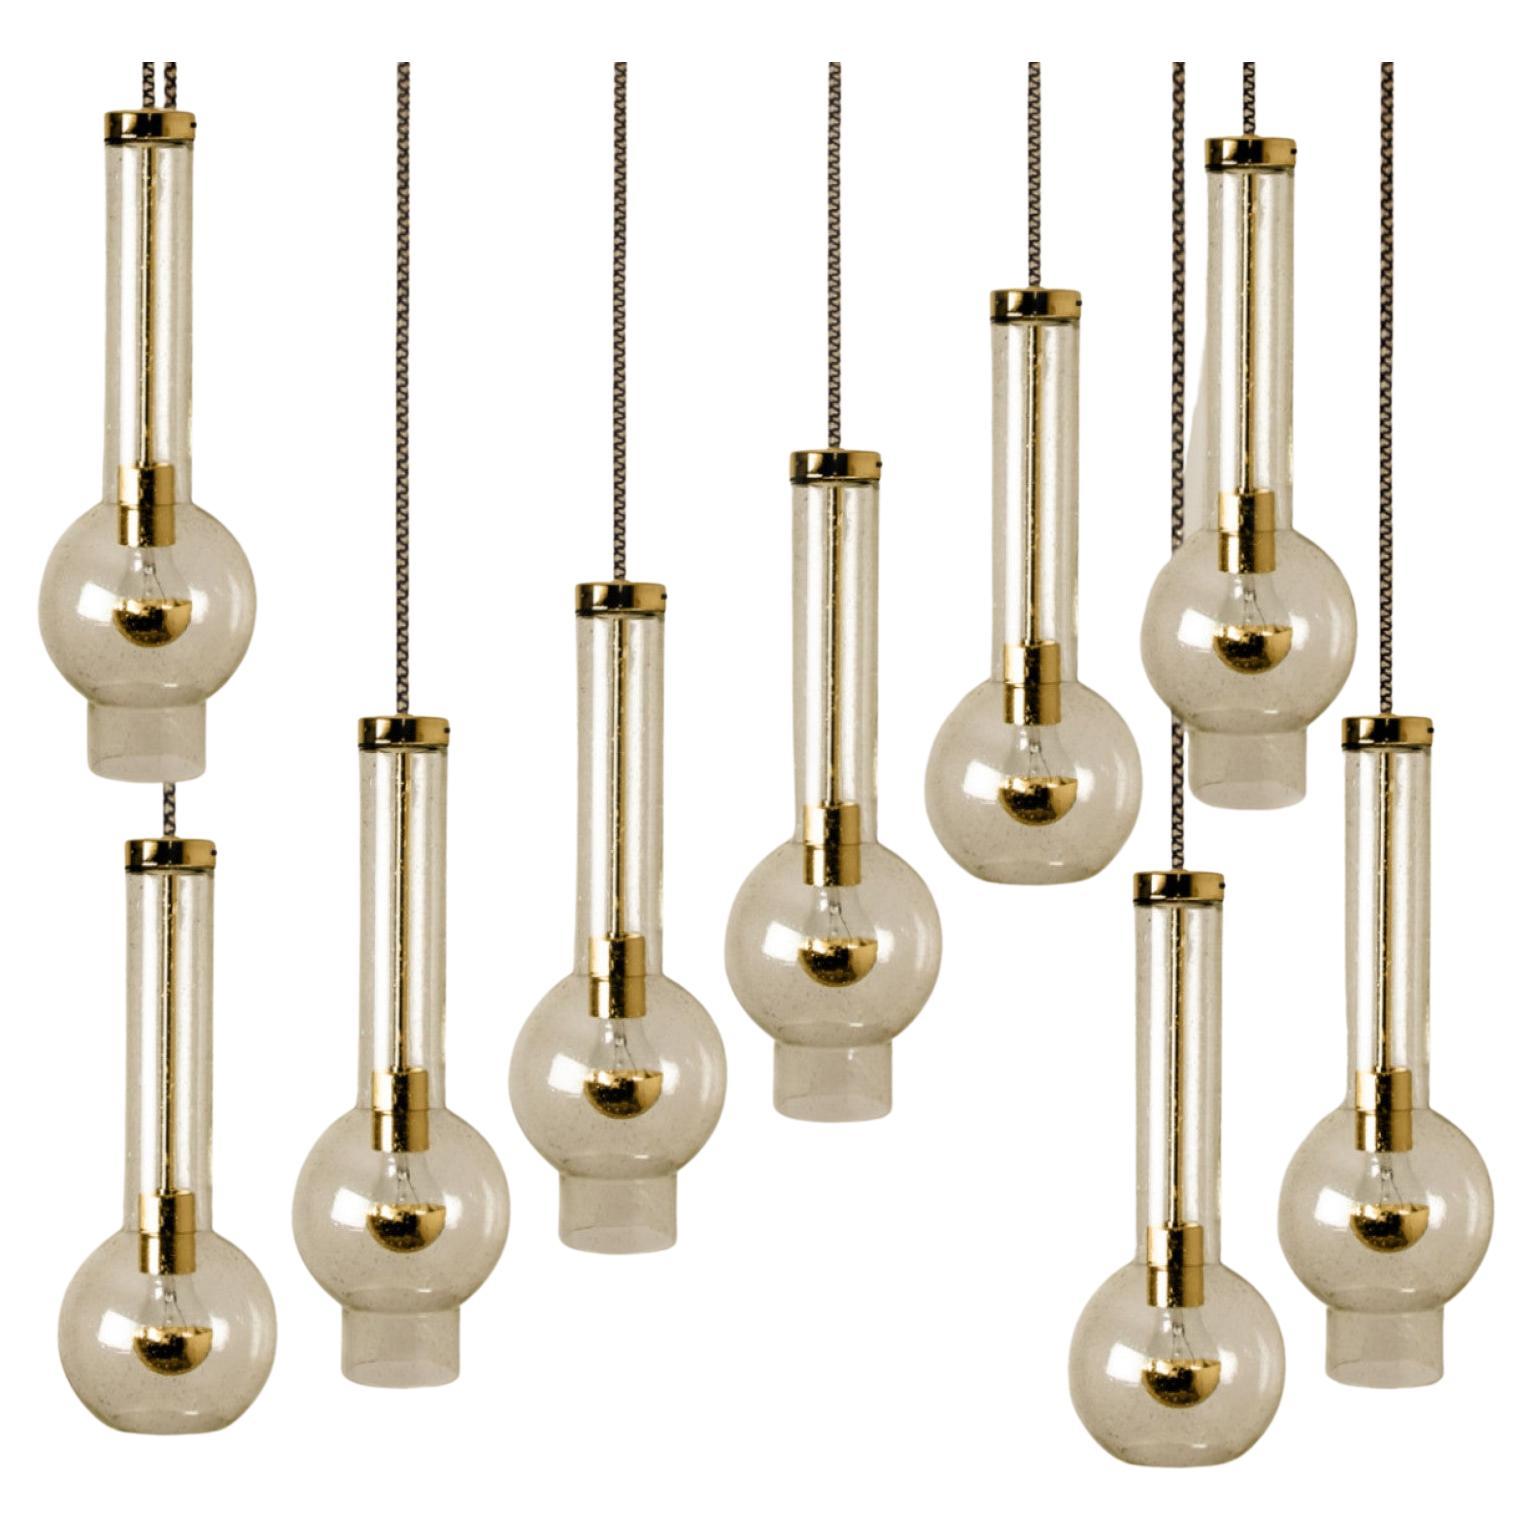 1 of the 10 Blown Glass and Brass Tube Pedant Lights by Staff Leuchten, 1970s